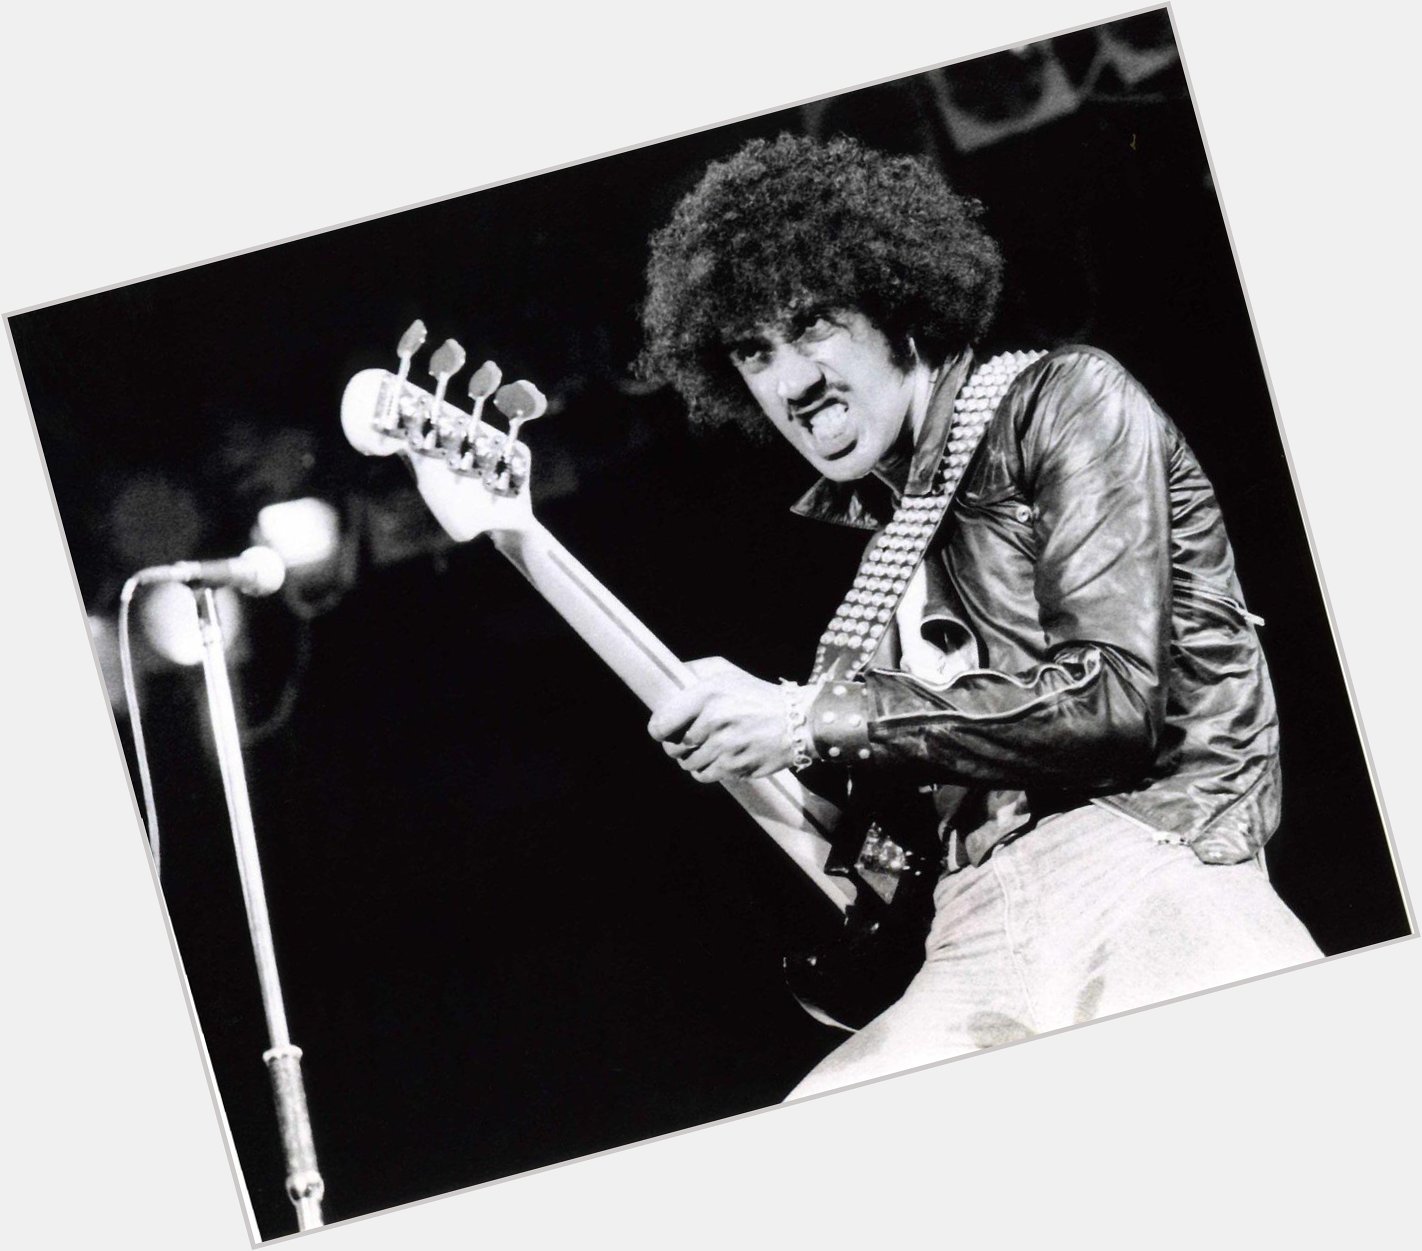 Happy belated birthday to the late, great, Phil Lynott of Thin Lizzy. Phil would have been 66 years old yesterday. 